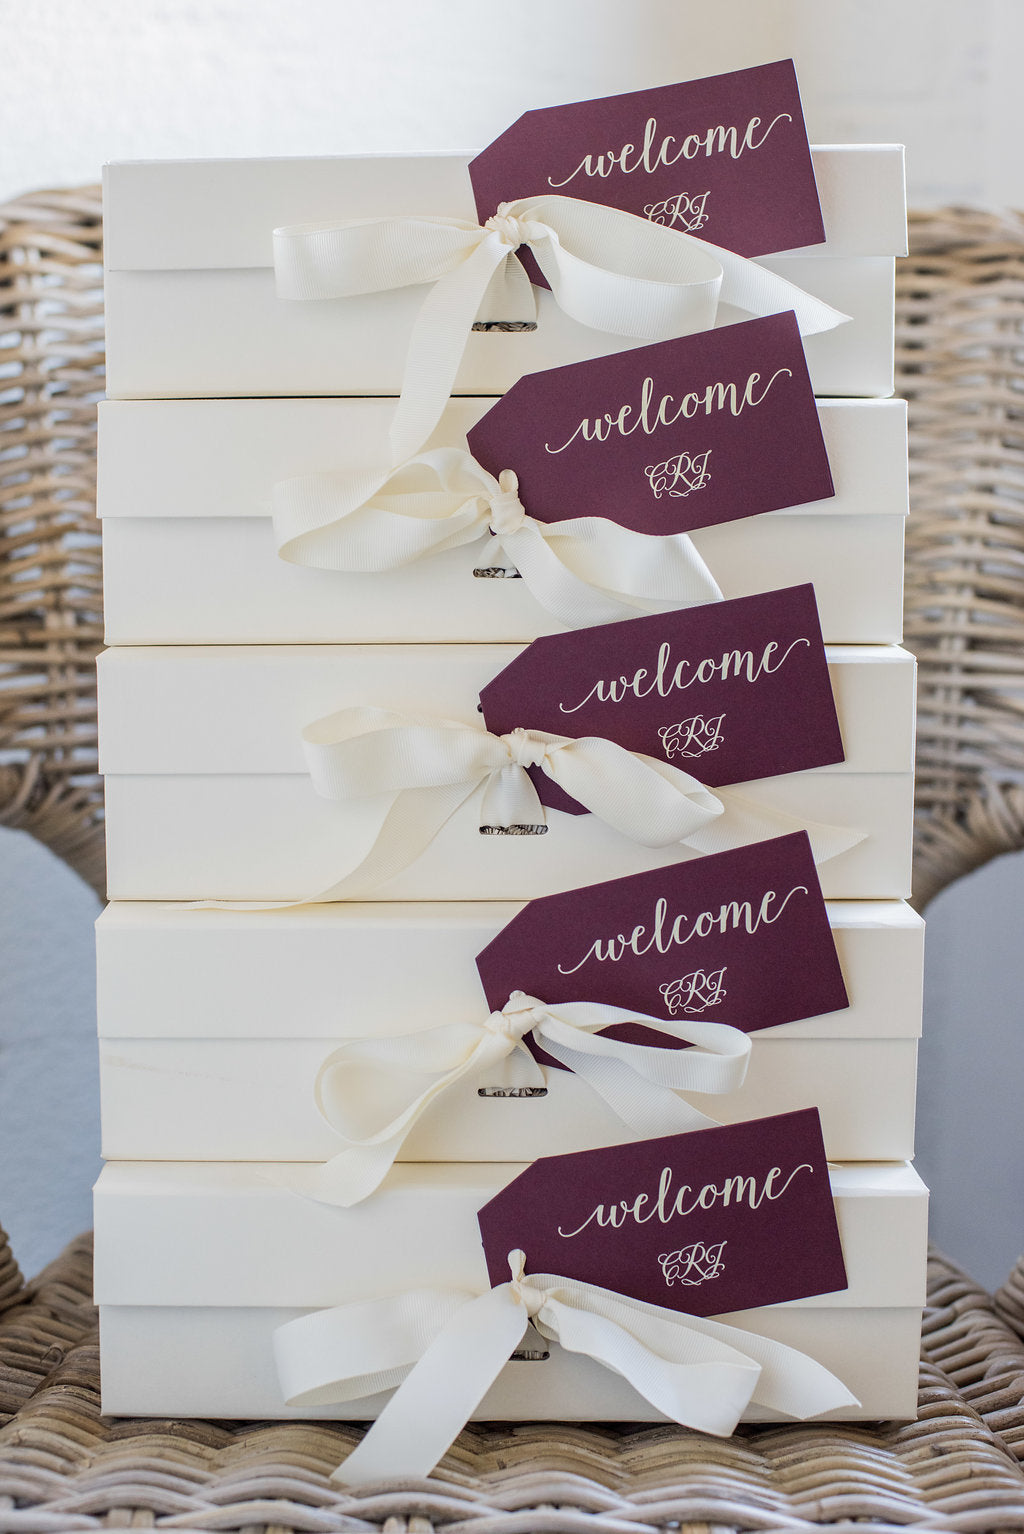 Black tie DC wedding welcome gifts at Mellon Auditorium